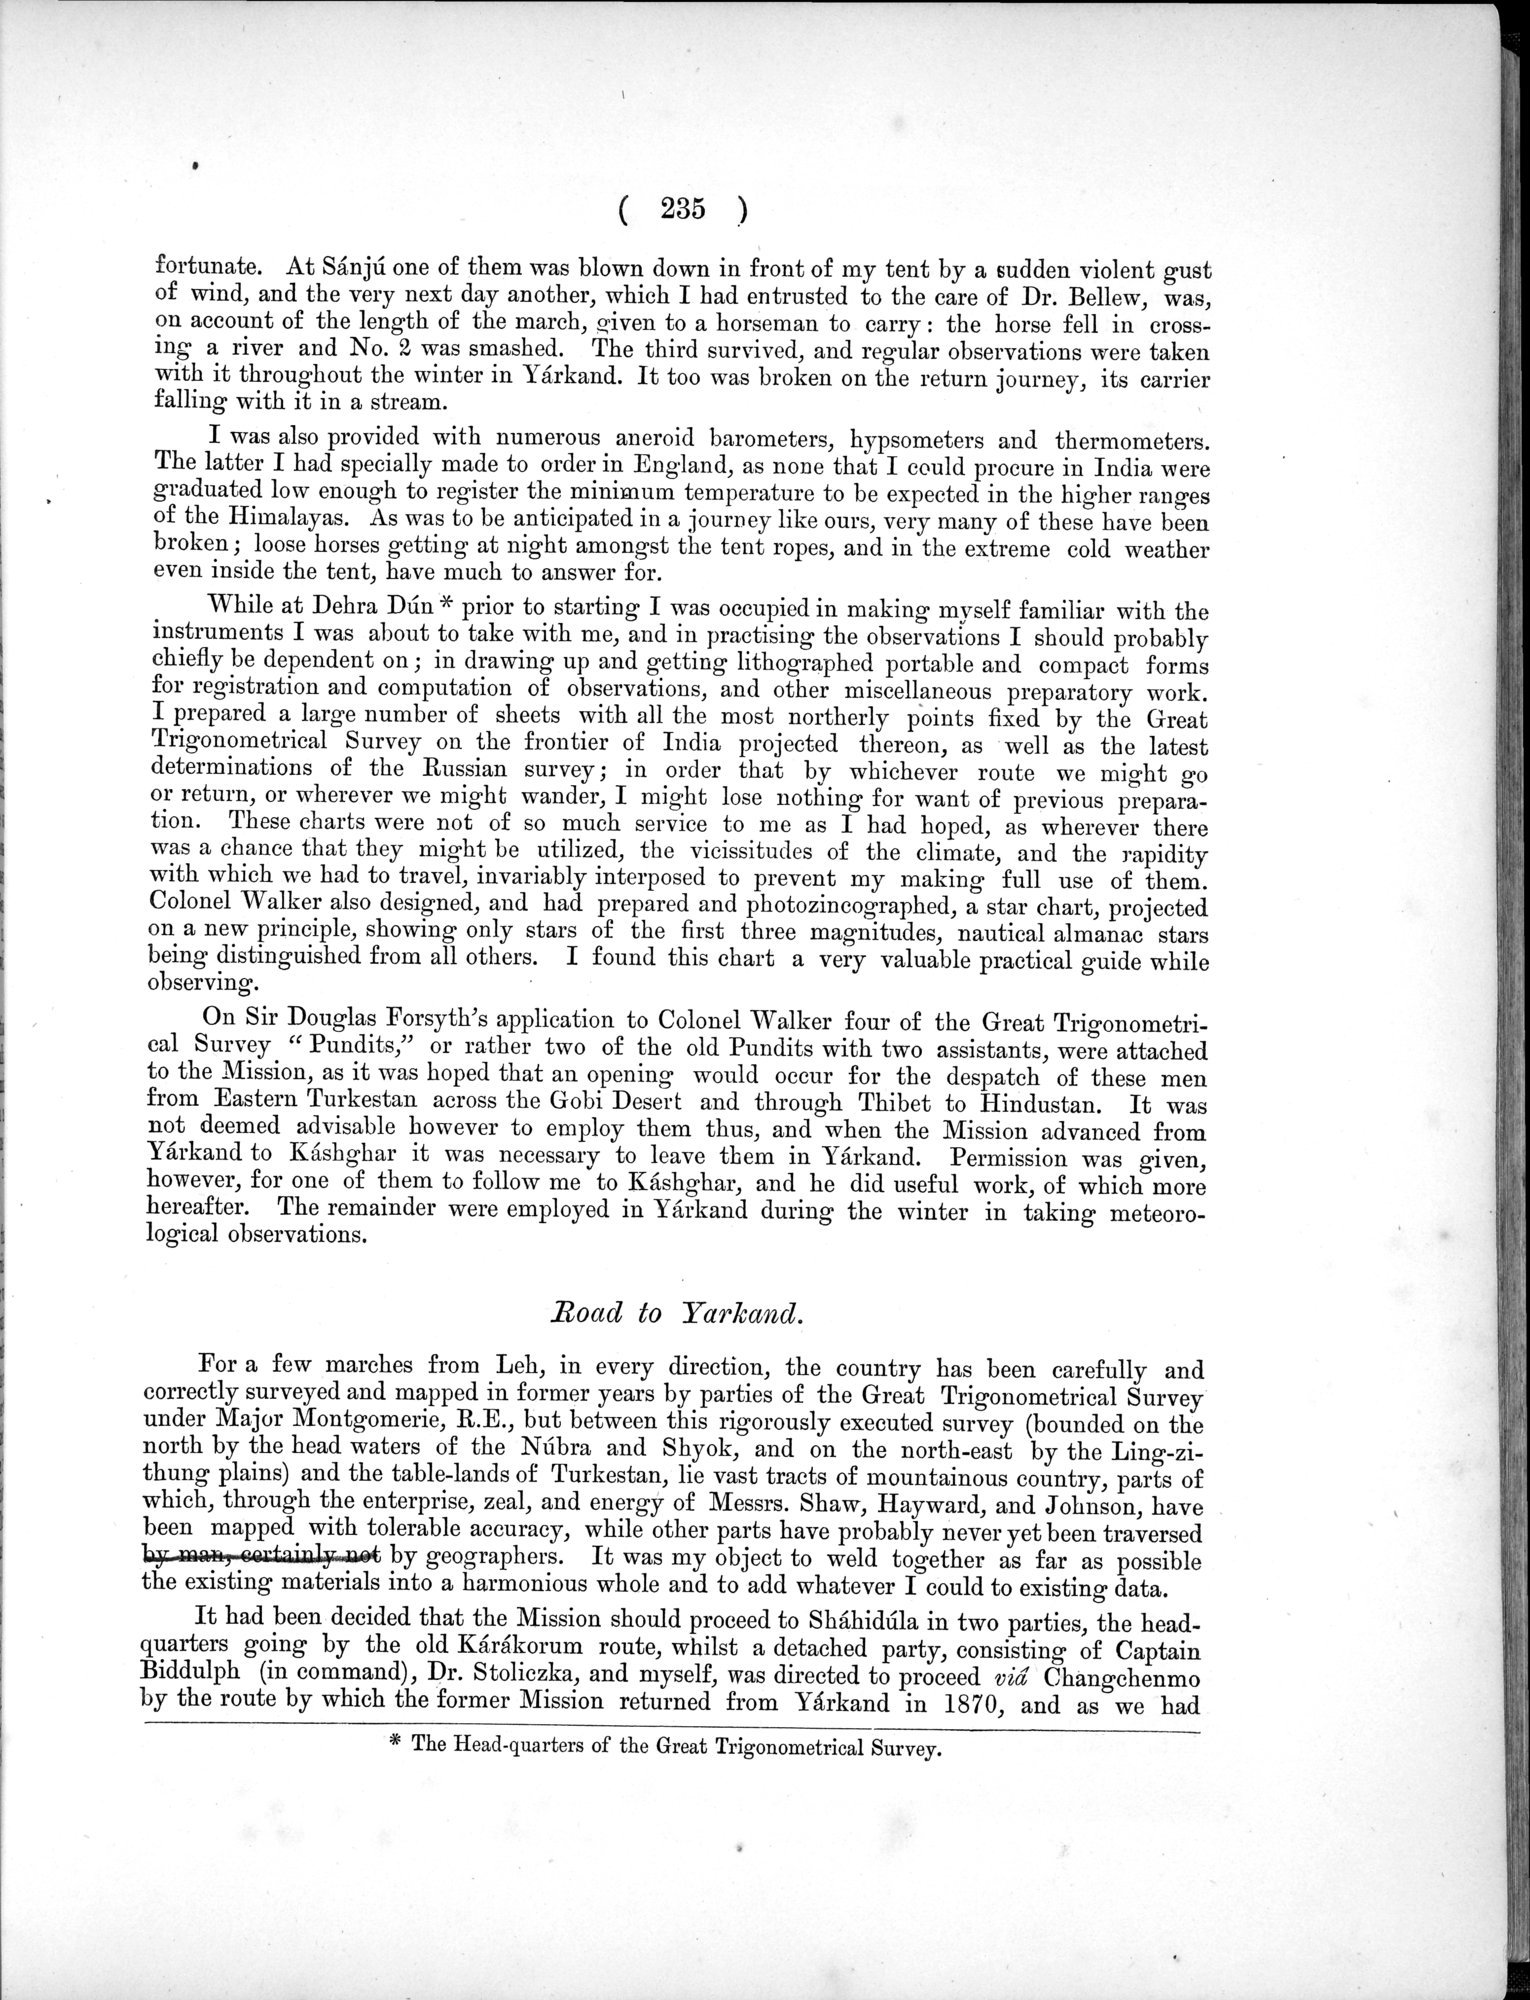 Report of a Mission to Yarkund in 1873 : vol.1 / Page 335 (Grayscale High Resolution Image)